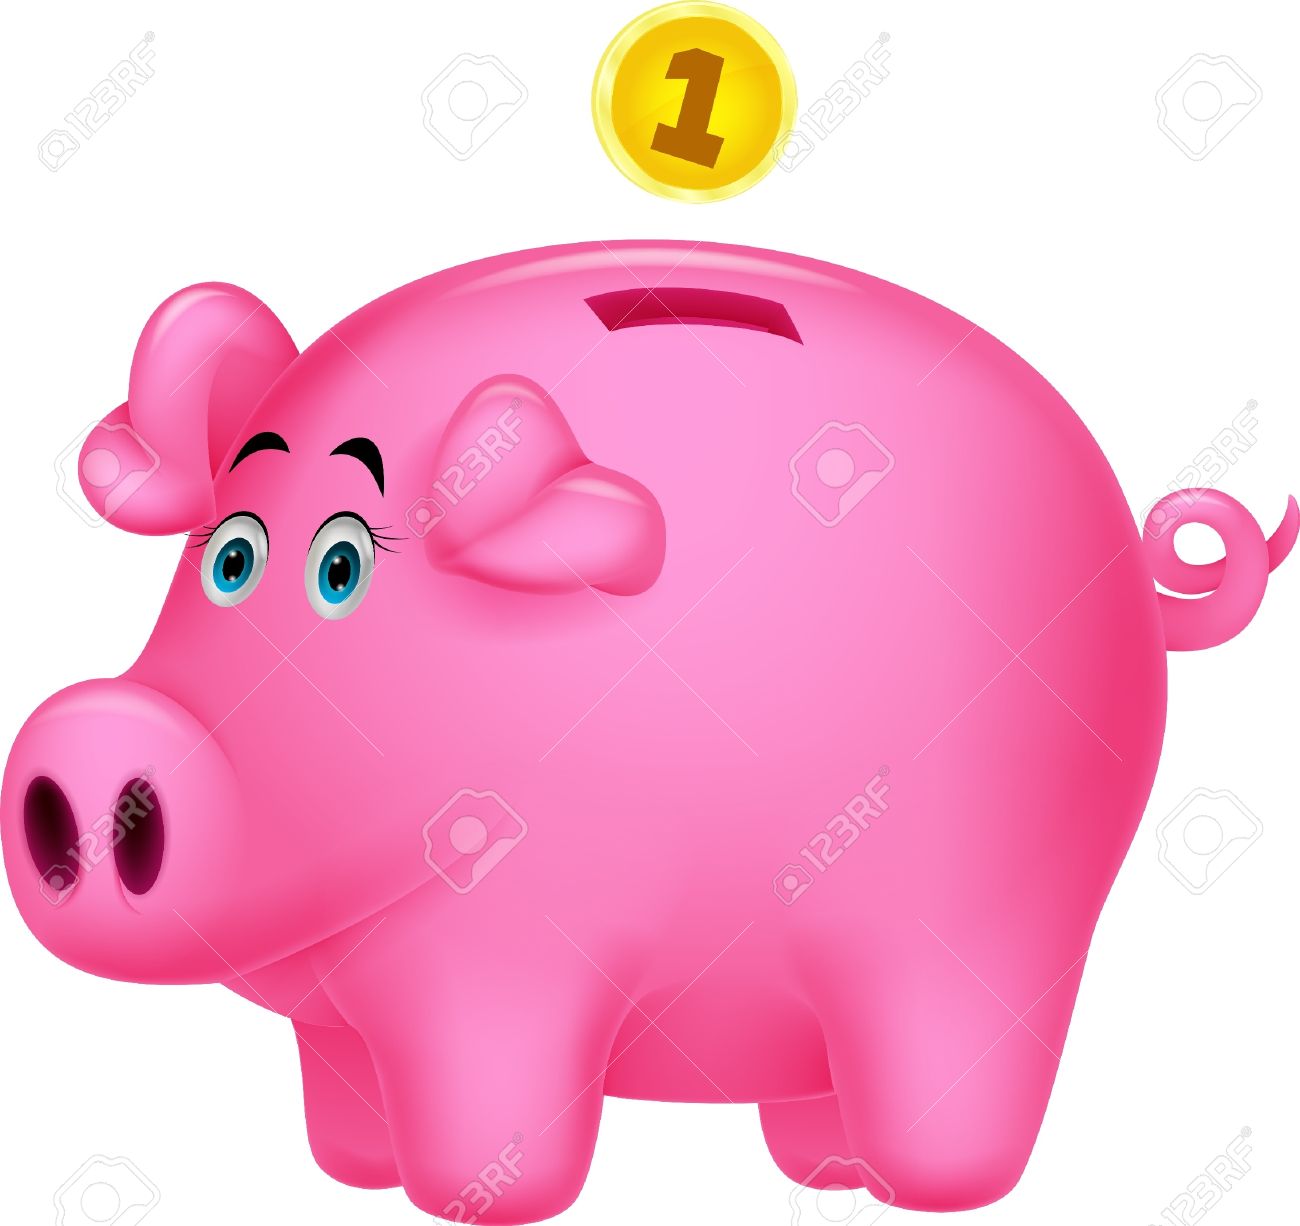 Free clipart of piggy bank 7 » Clipart Station.